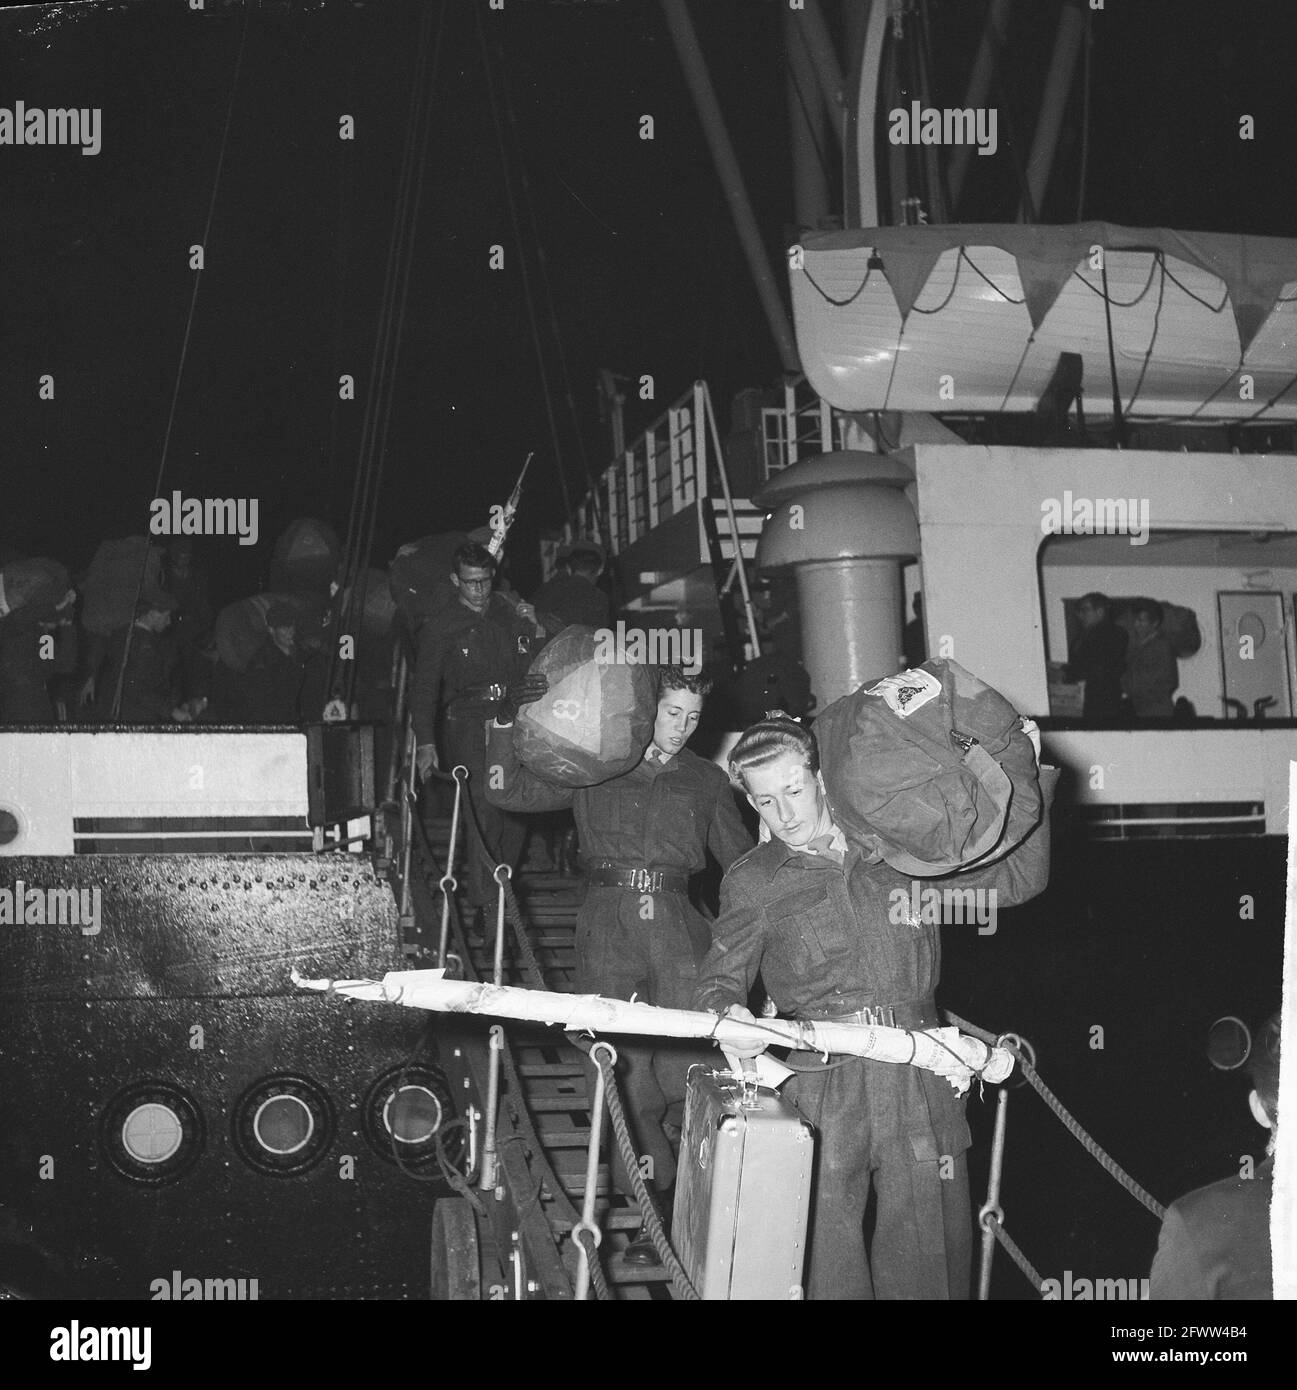 Arrival first detachment of the first Suriname Company in Amsterdam, 23 February 1961, COMPAGNIES, DETACHMENTS, arrivals, The Netherlands, 20th century press agency photo, news to remember, documentary, historic photography 1945-1990, visual stories, human history of the Twentieth Century, capturing moments in time Stock Photo